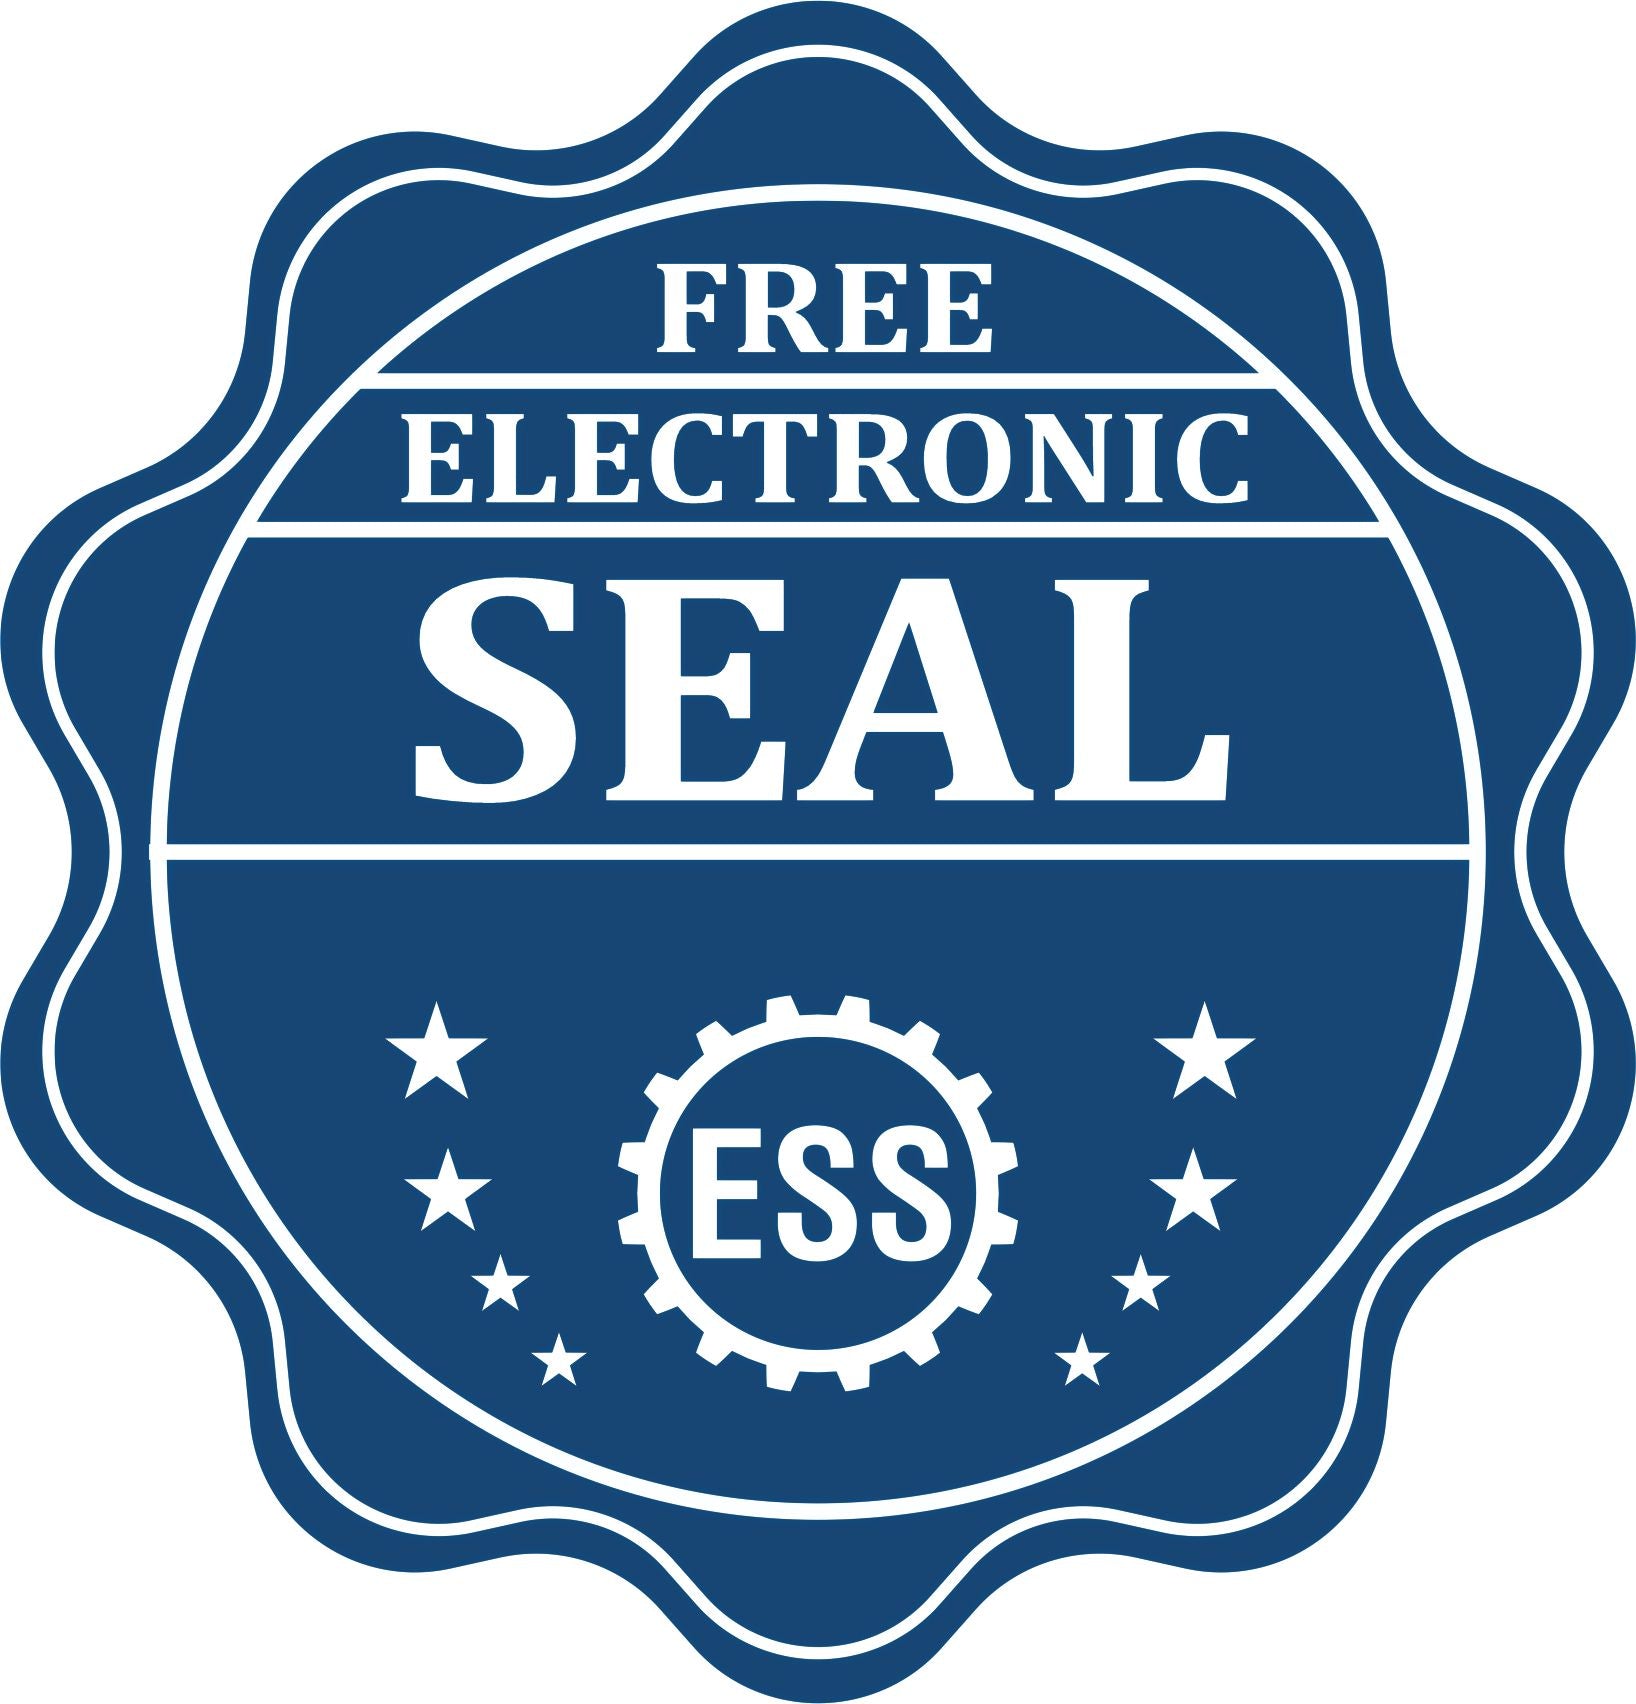 A badge showing a free electronic seal for the Indiana Geologist Desk Seal with stars and the ESS gear on the emblem.